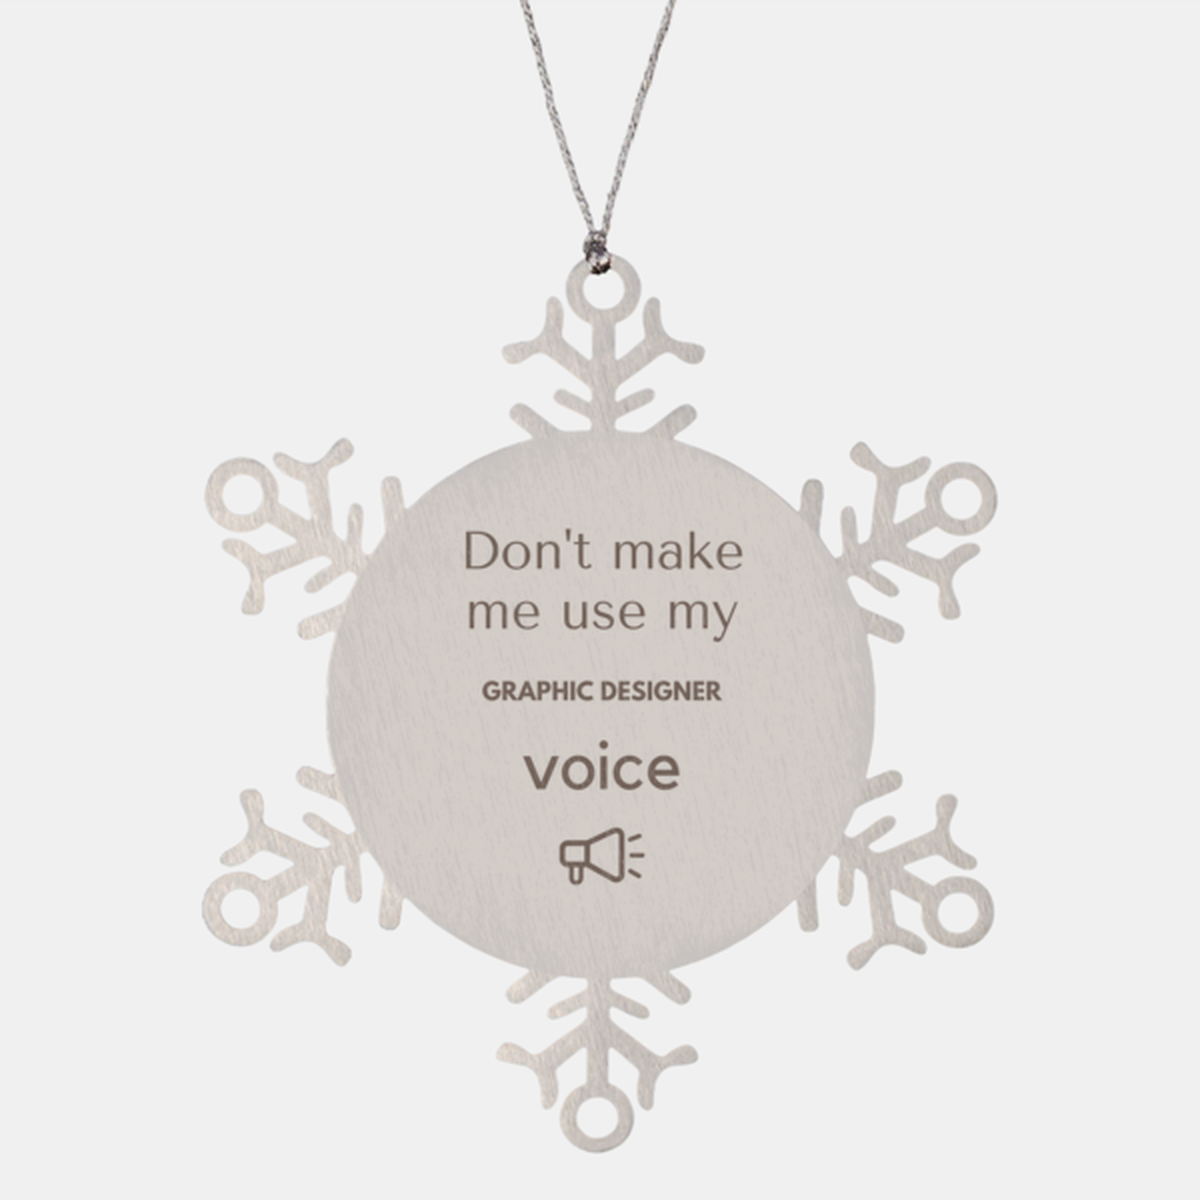 Don't make me use my Graphic Designer voice, Sarcasm Graphic Designer Ornament Gifts, Christmas Graphic Designer Snowflake Ornament Unique Gifts For Graphic Designer Coworkers, Men, Women, Colleague, Friends